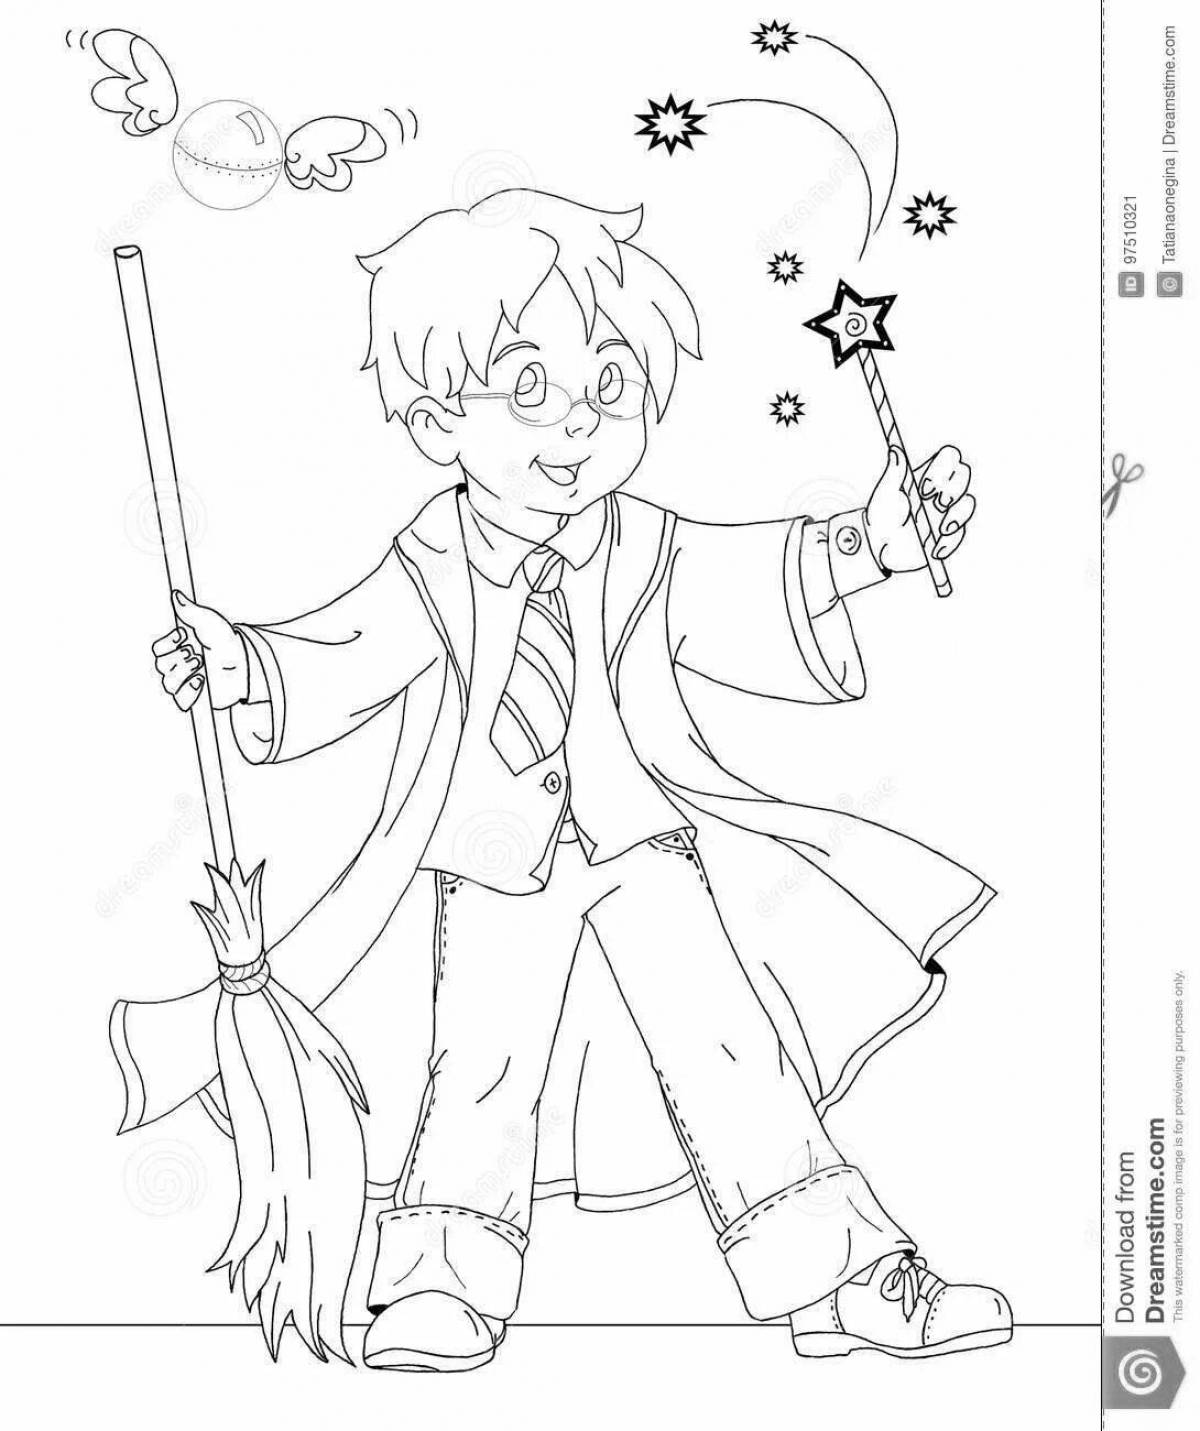 Charming magician coloring page for kids